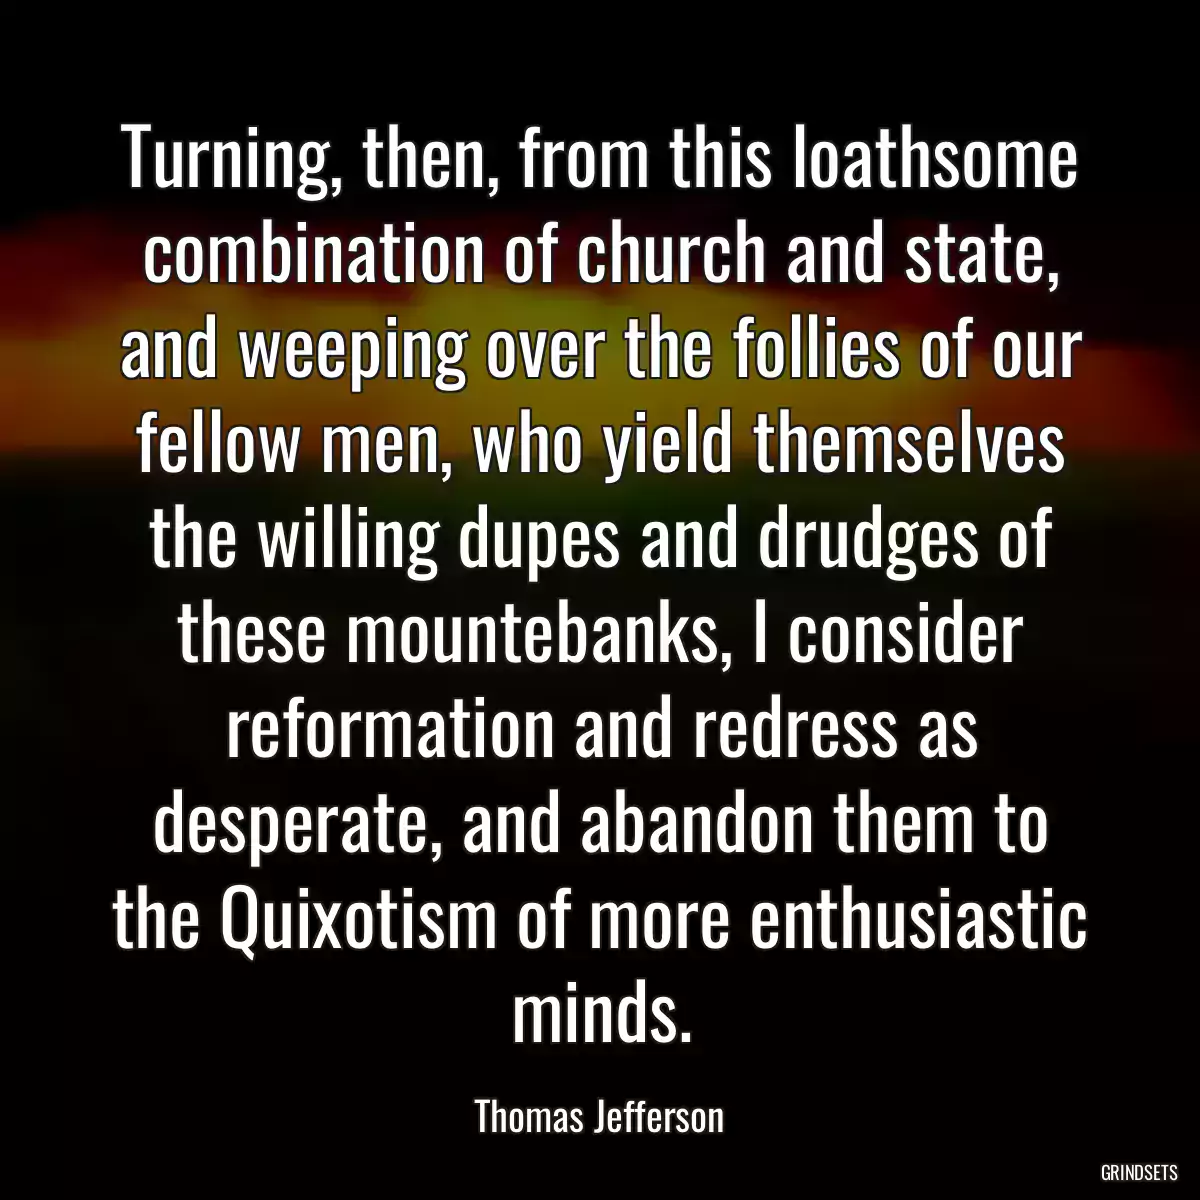 Turning, then, from this loathsome combination of church and state, and weeping over the follies of our fellow men, who yield themselves the willing dupes and drudges of these mountebanks, I consider reformation and redress as desperate, and abandon them to the Quixotism of more enthusiastic minds.